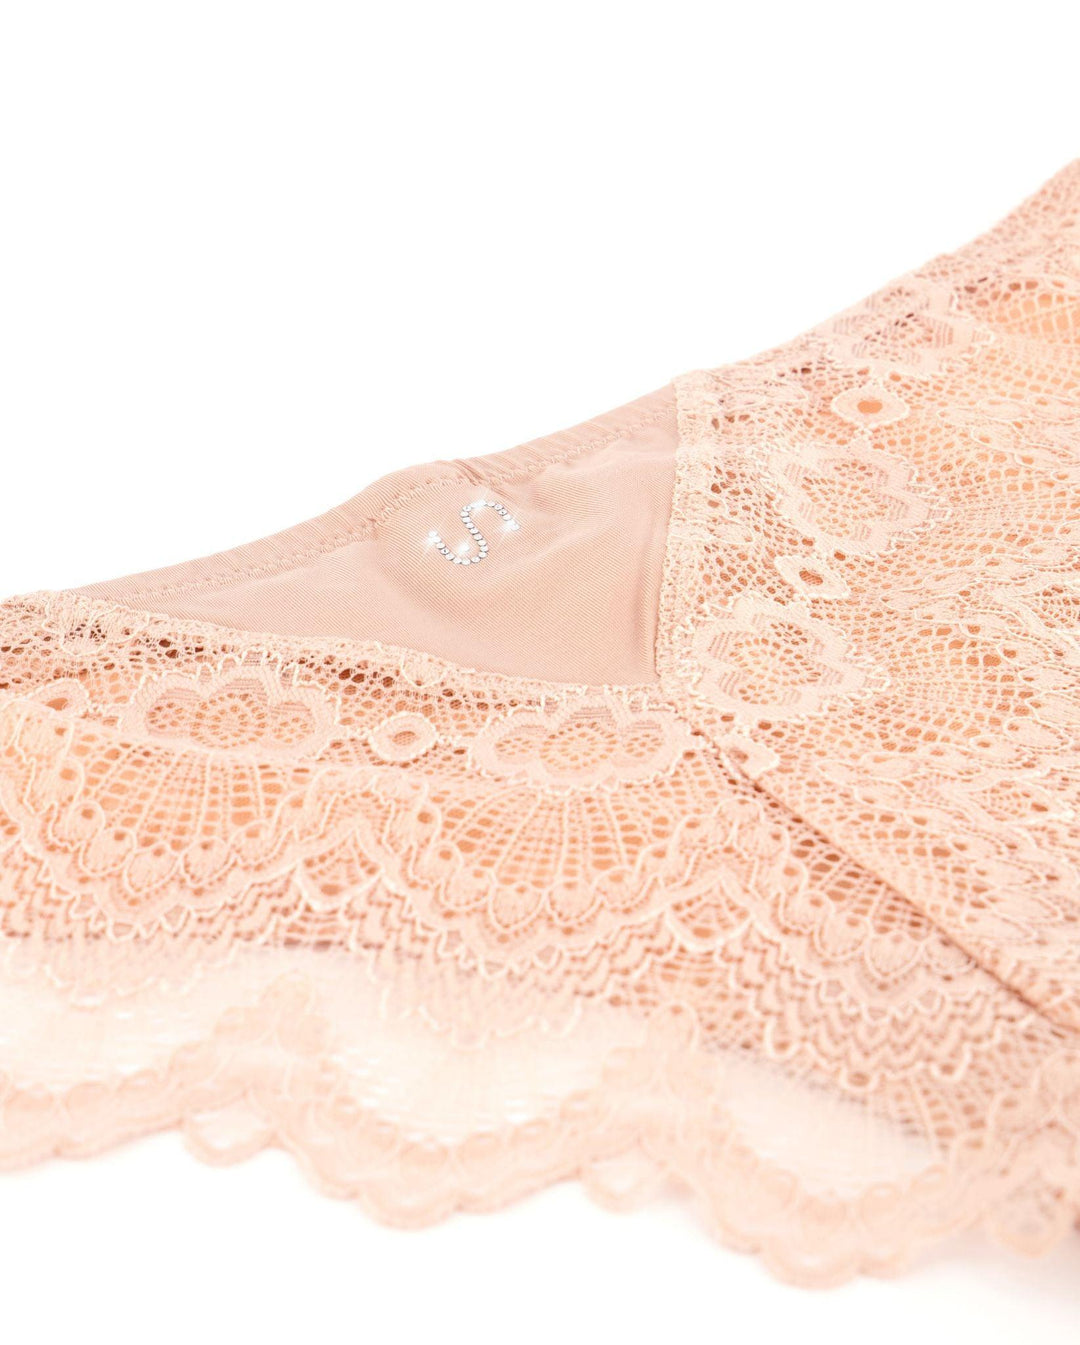 Lace Mesh Cheeky Naked